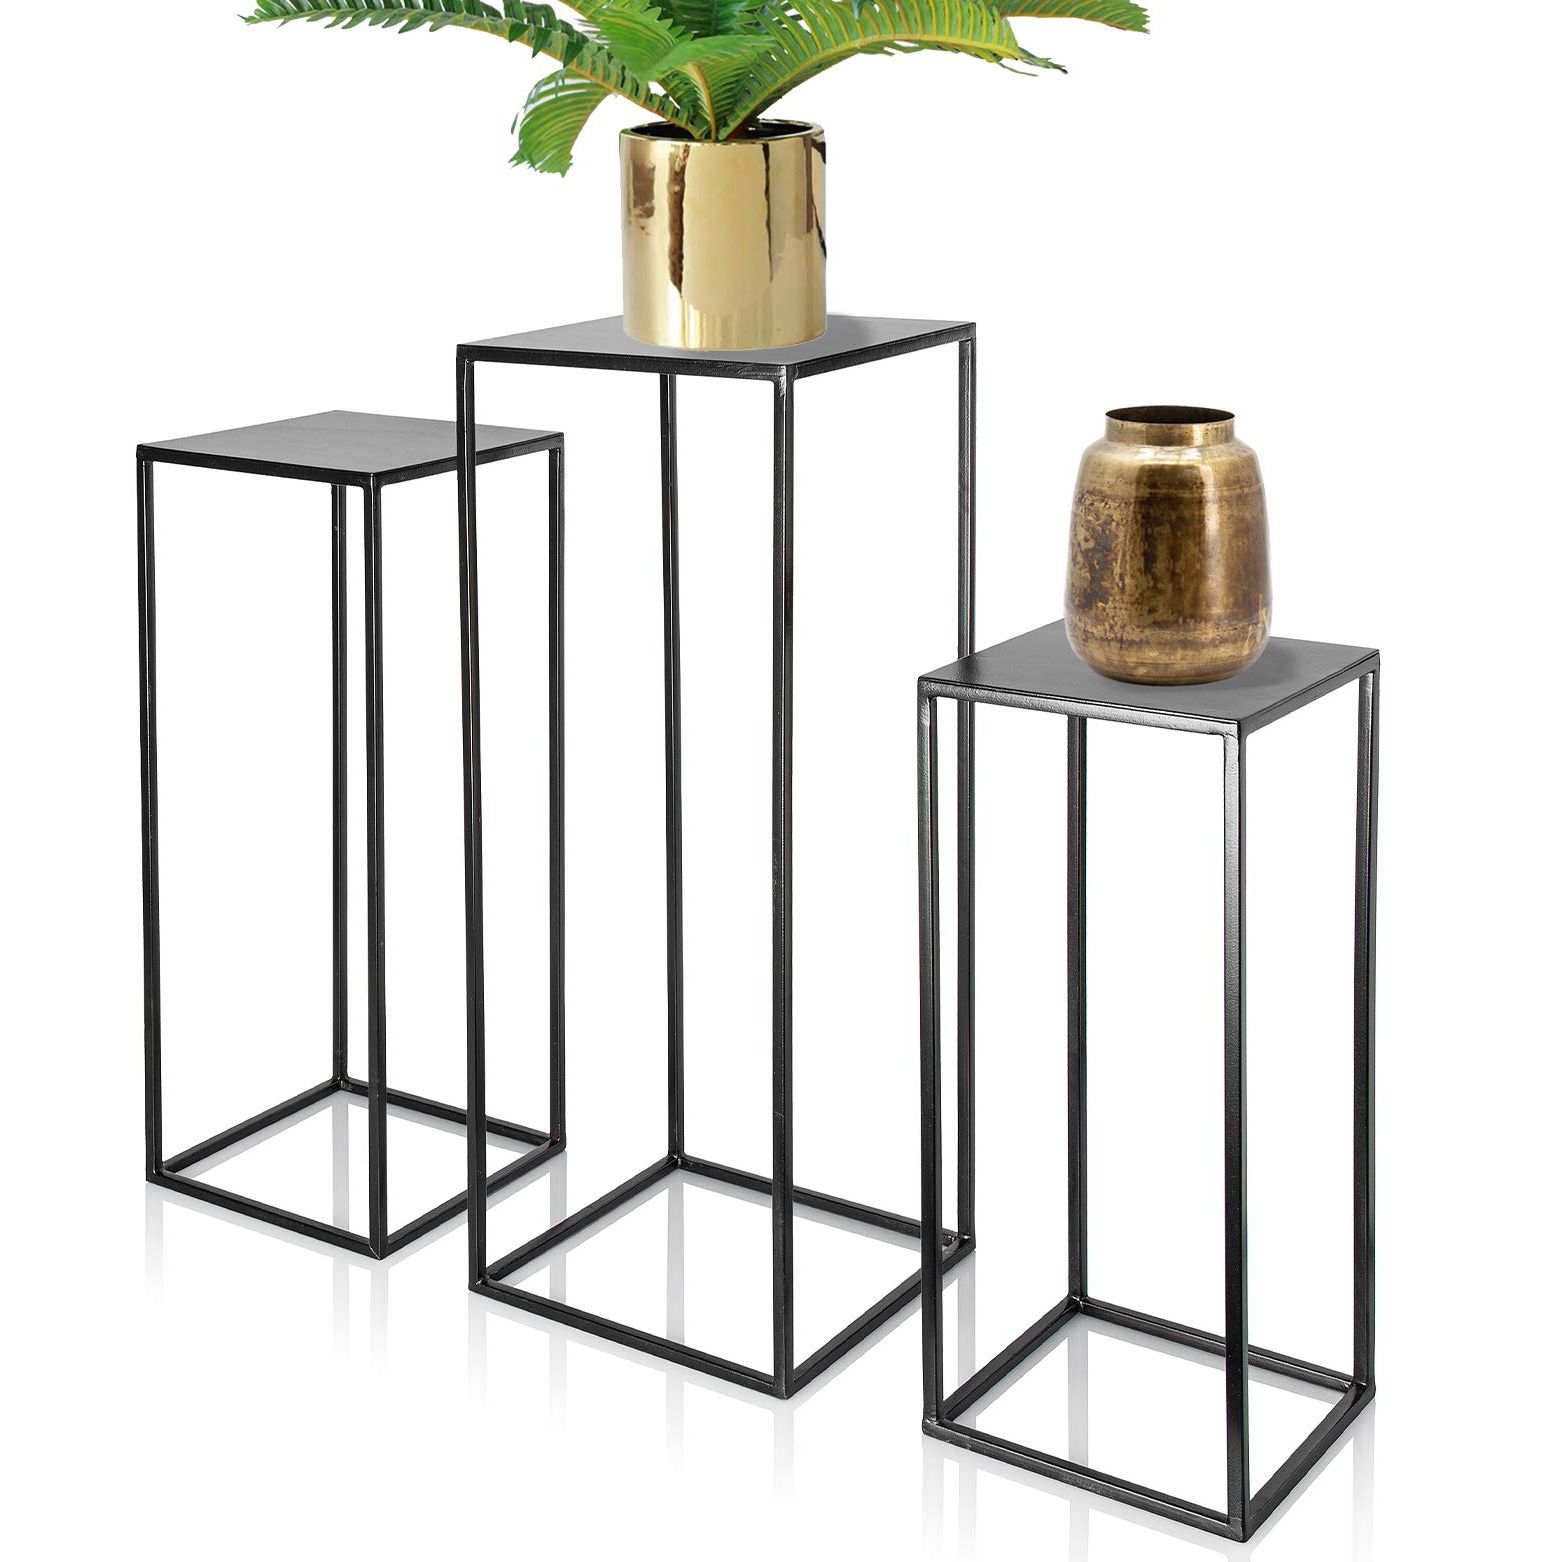 Preferred Amazon: Kimisty Set Of 3 Metal Pedestal Plant Stand, Nesting Display  Accent End Table, High Square Rack Flower Holder, Black Corner Planter Pot  Rack, Tall Tiered Decor, Modern Decorative Wedding Stand : Intended For Set Of 3 Plant Stands (View 2 of 10)